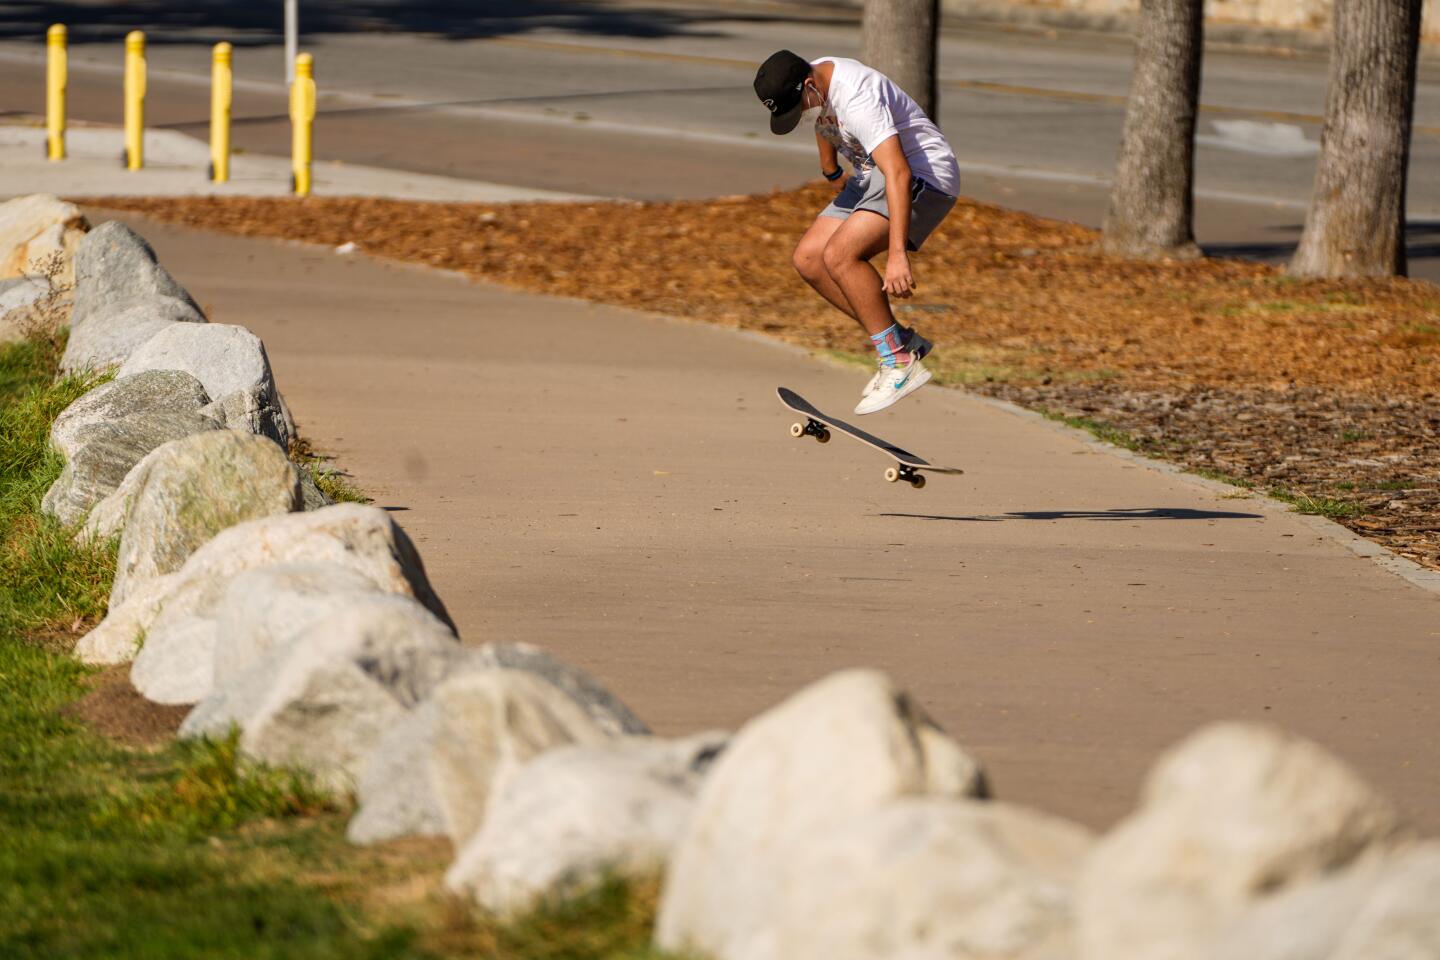 A skateboarder jumps while skating Tuesday along the sidewalk near the Rose Bowl in Pasadena.